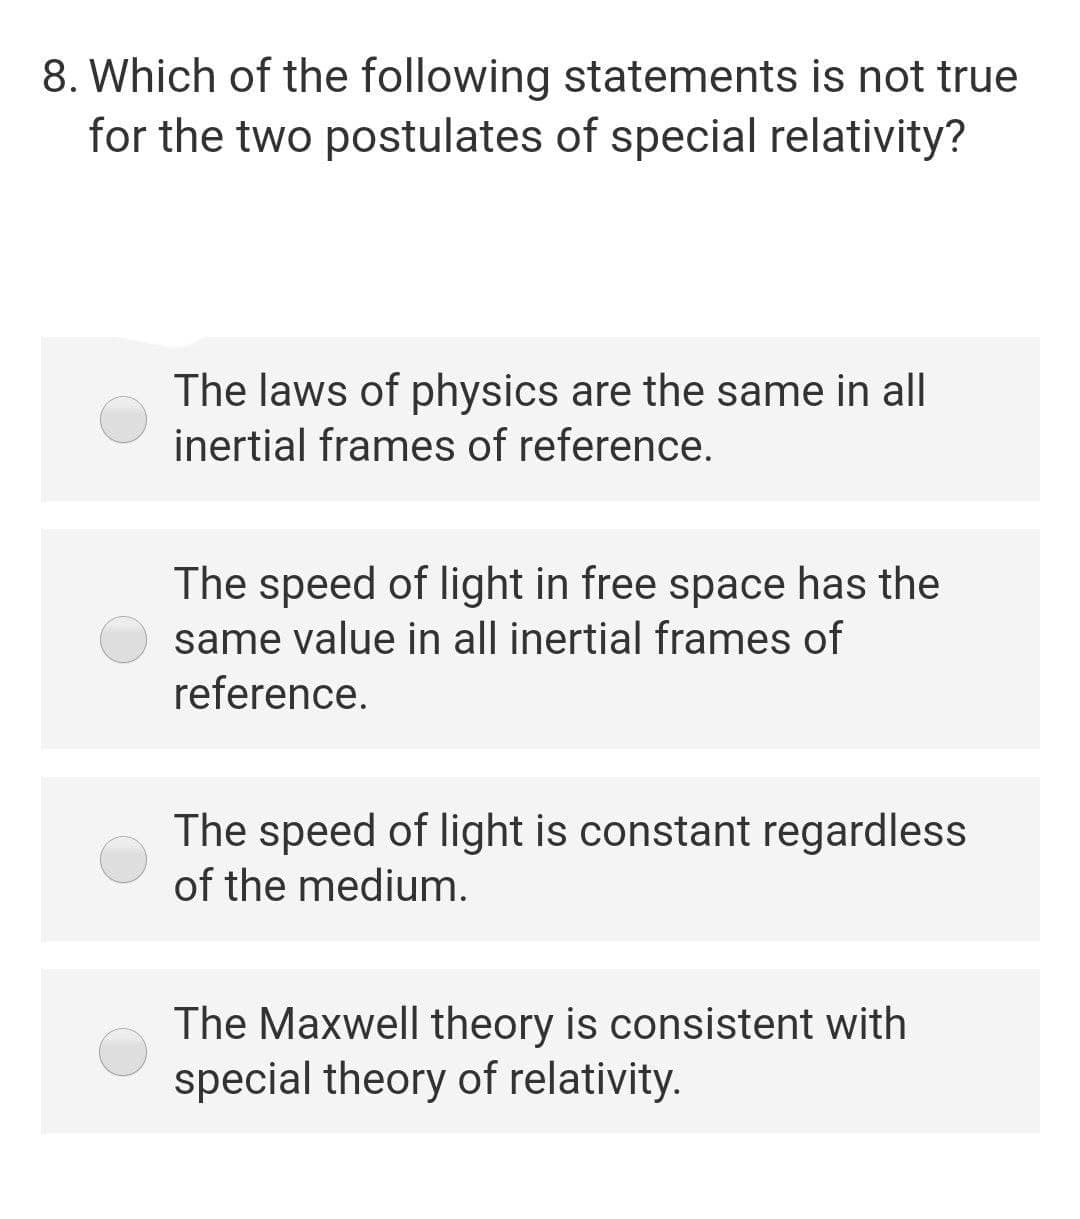 8. Which of the following statements is not true
for the two postulates of special relativity?
The laws of physics are the same in all
inertial frames of reference.
The speed of light in free space has the
same value in all inertial frames of
reference.
The speed of light is constant regardless
of the medium.
The Maxwell theory is consistent with
special theory of relativity.
